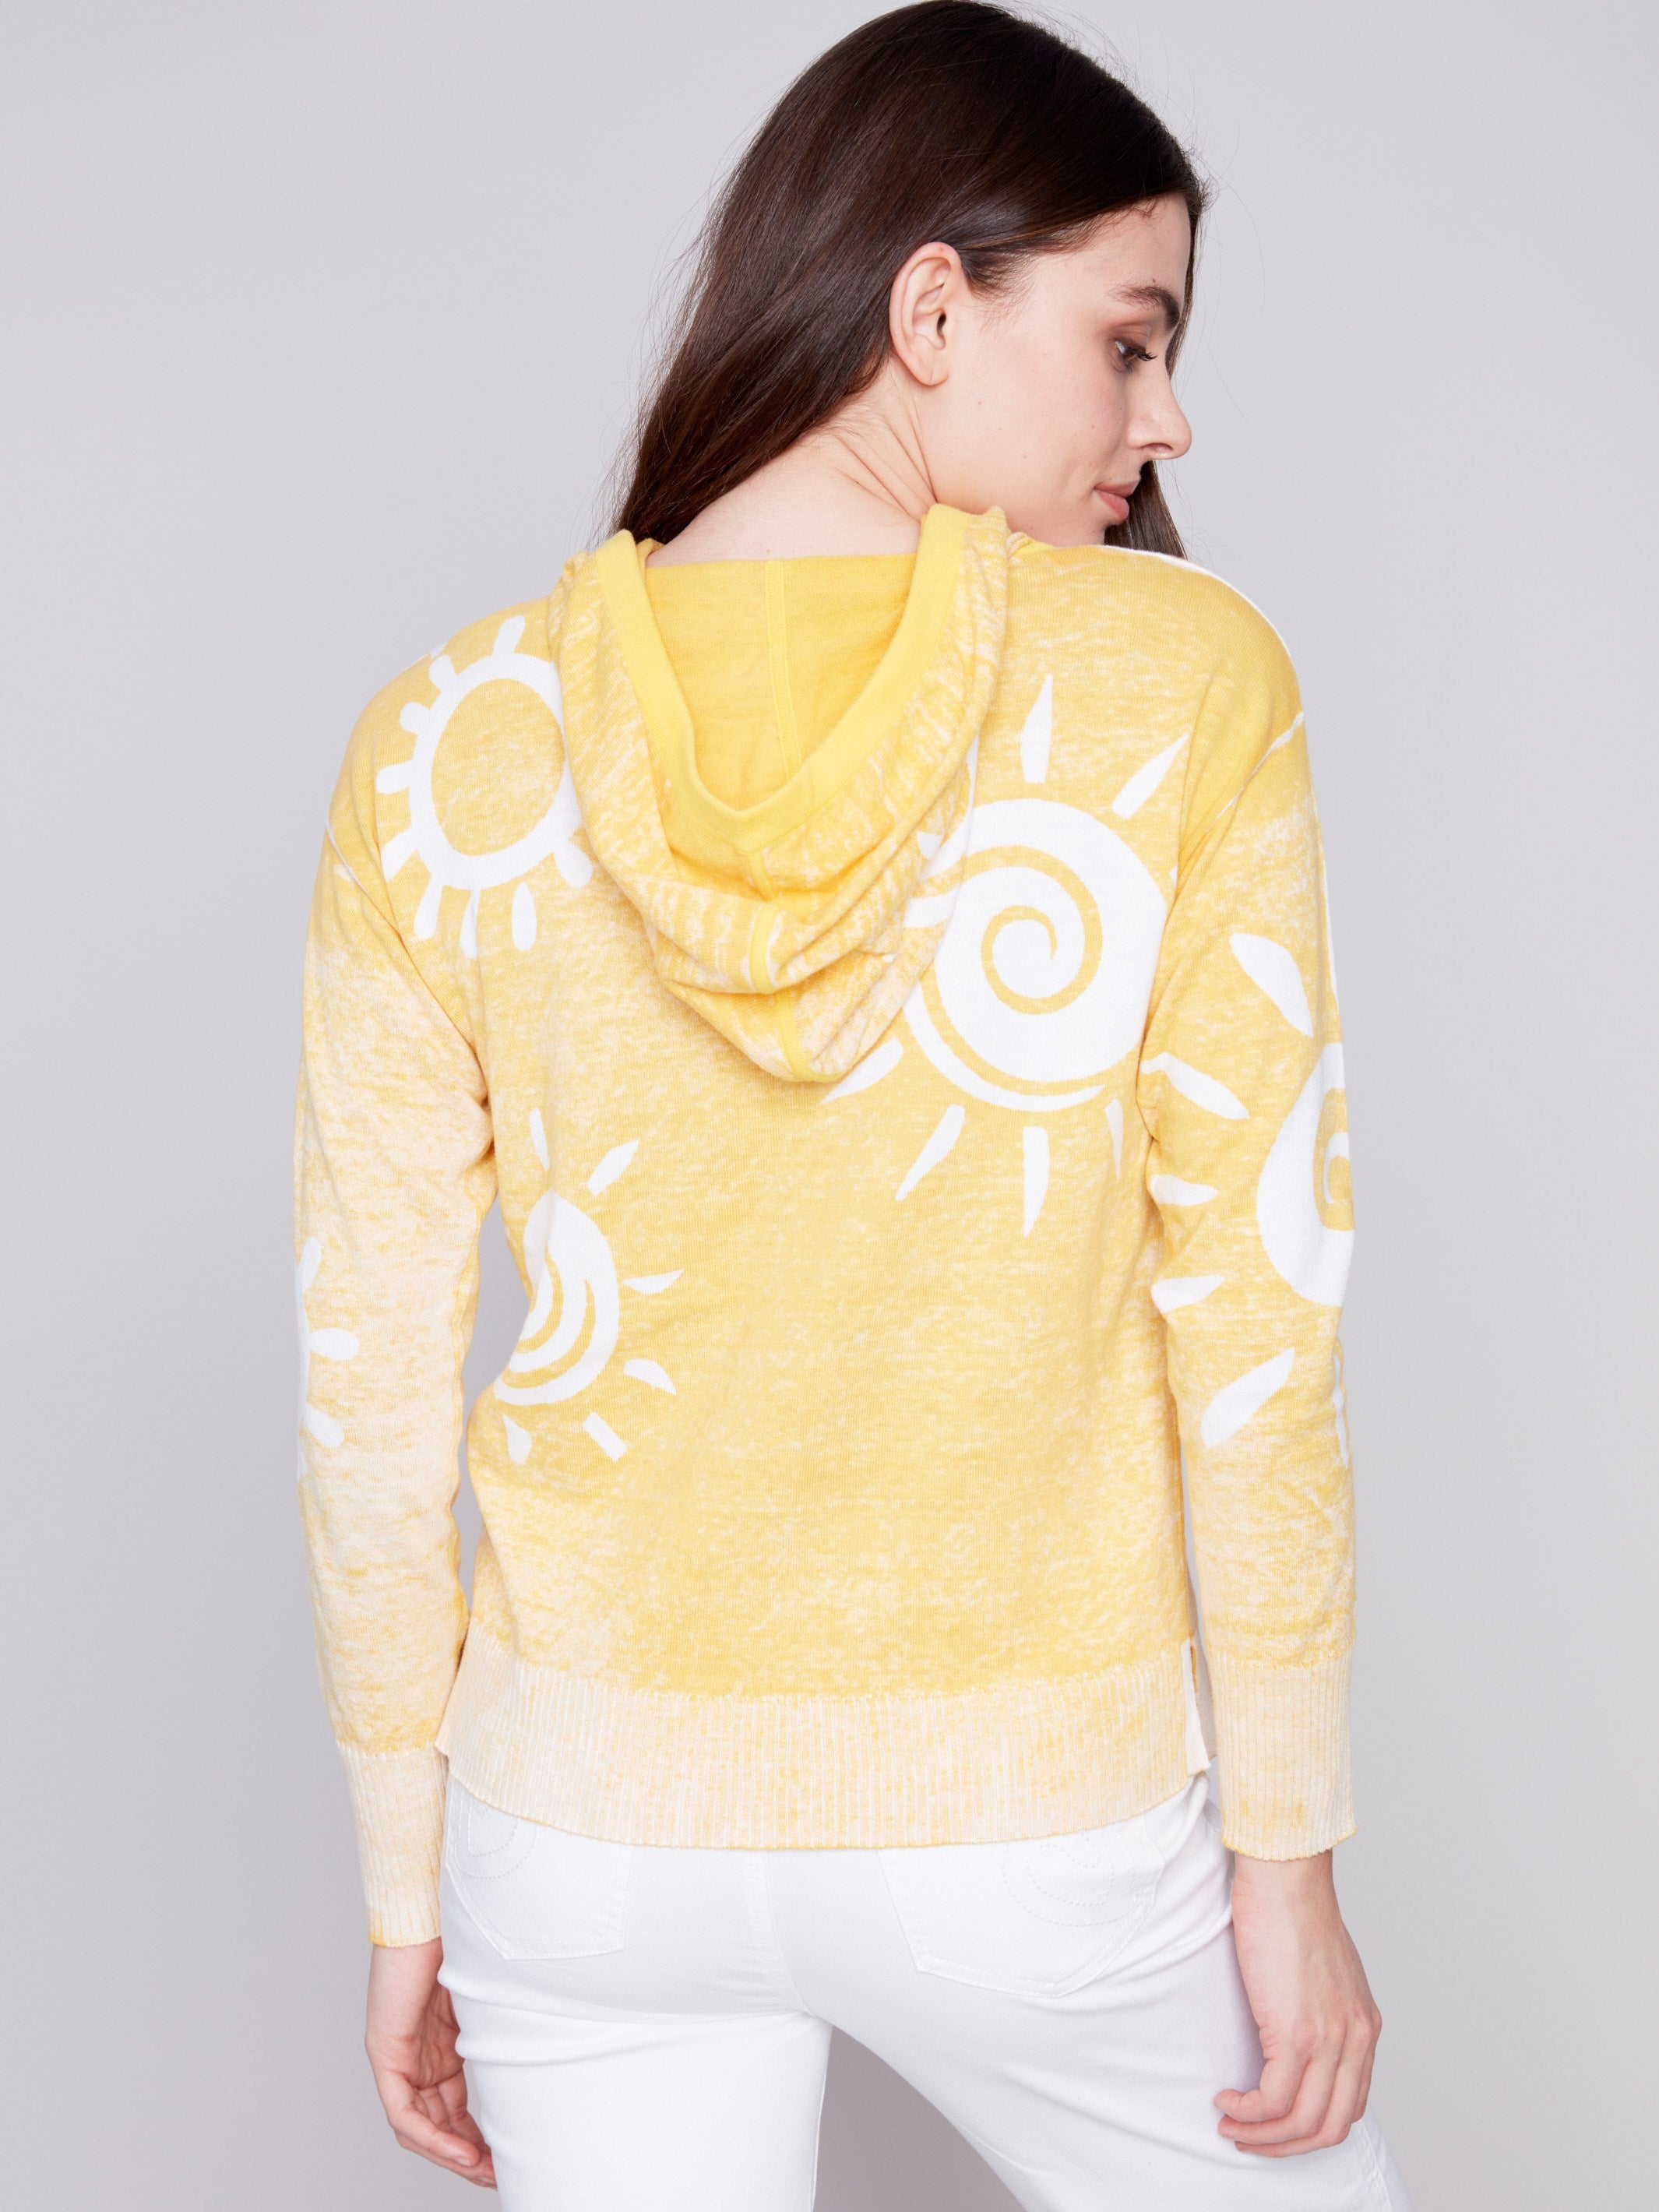 Reverse Printed Hoodie Sweater - Corn - Charlie B Collection Canada - Image 6